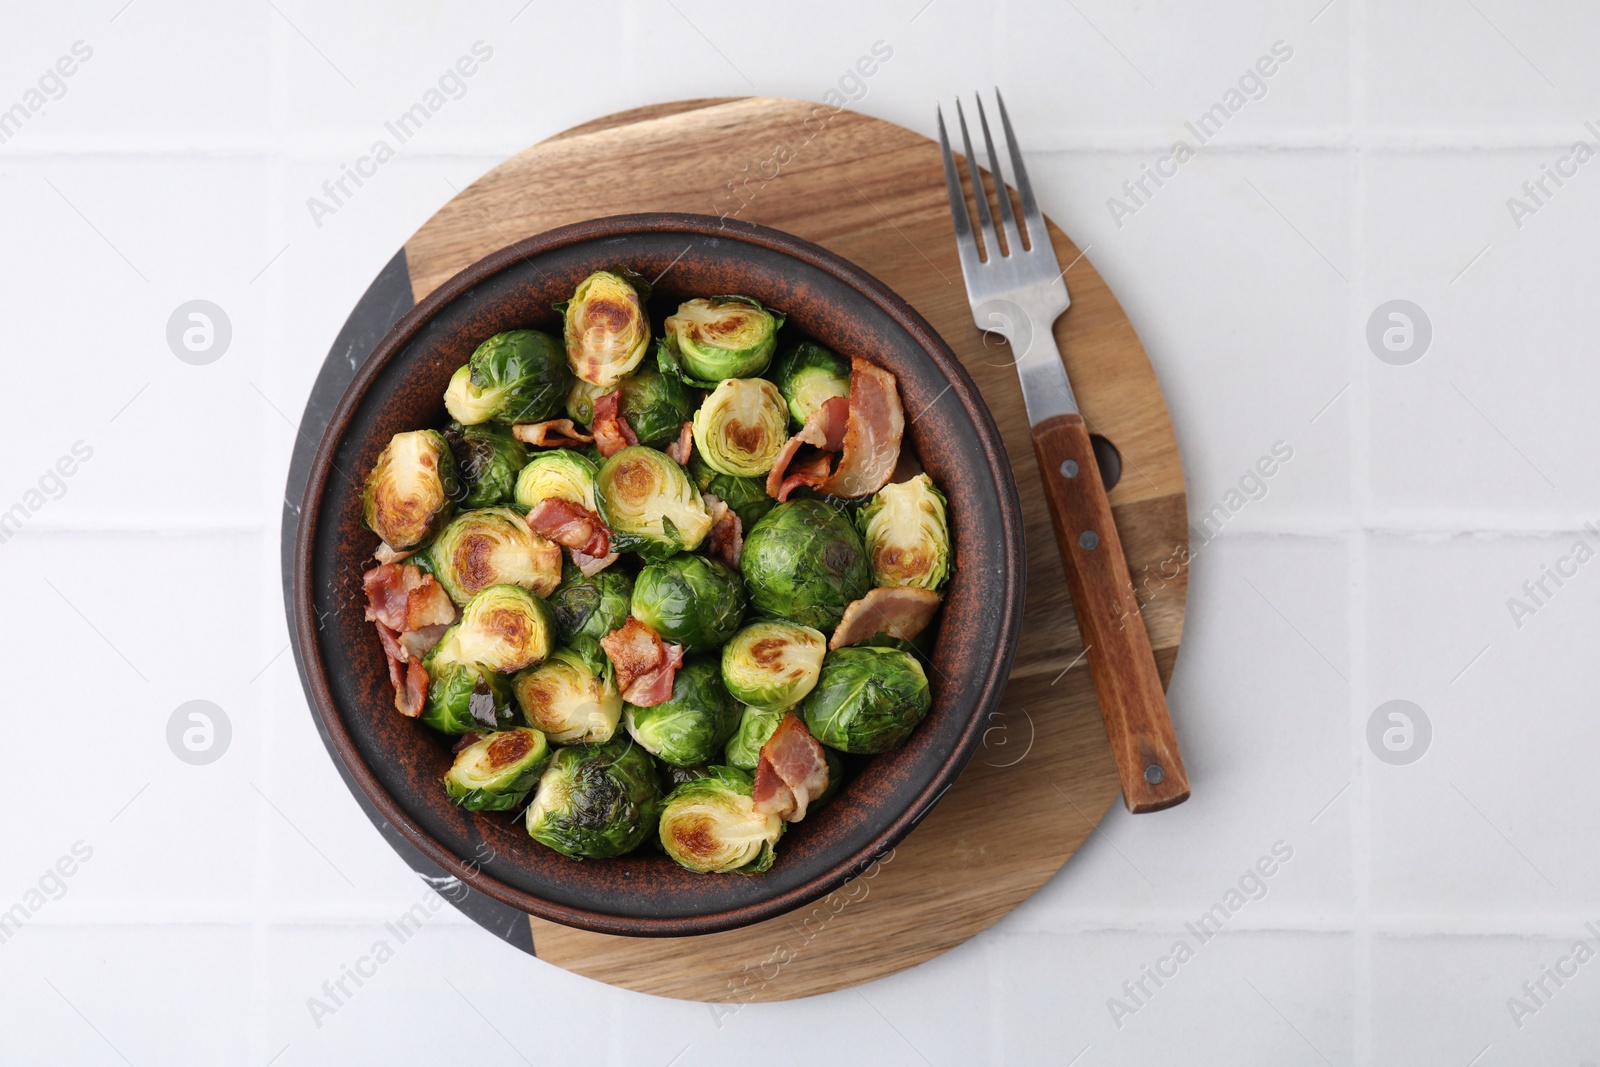 Photo of Delicious roasted Brussels sprouts and bacon in bowl on white tiled table, top view